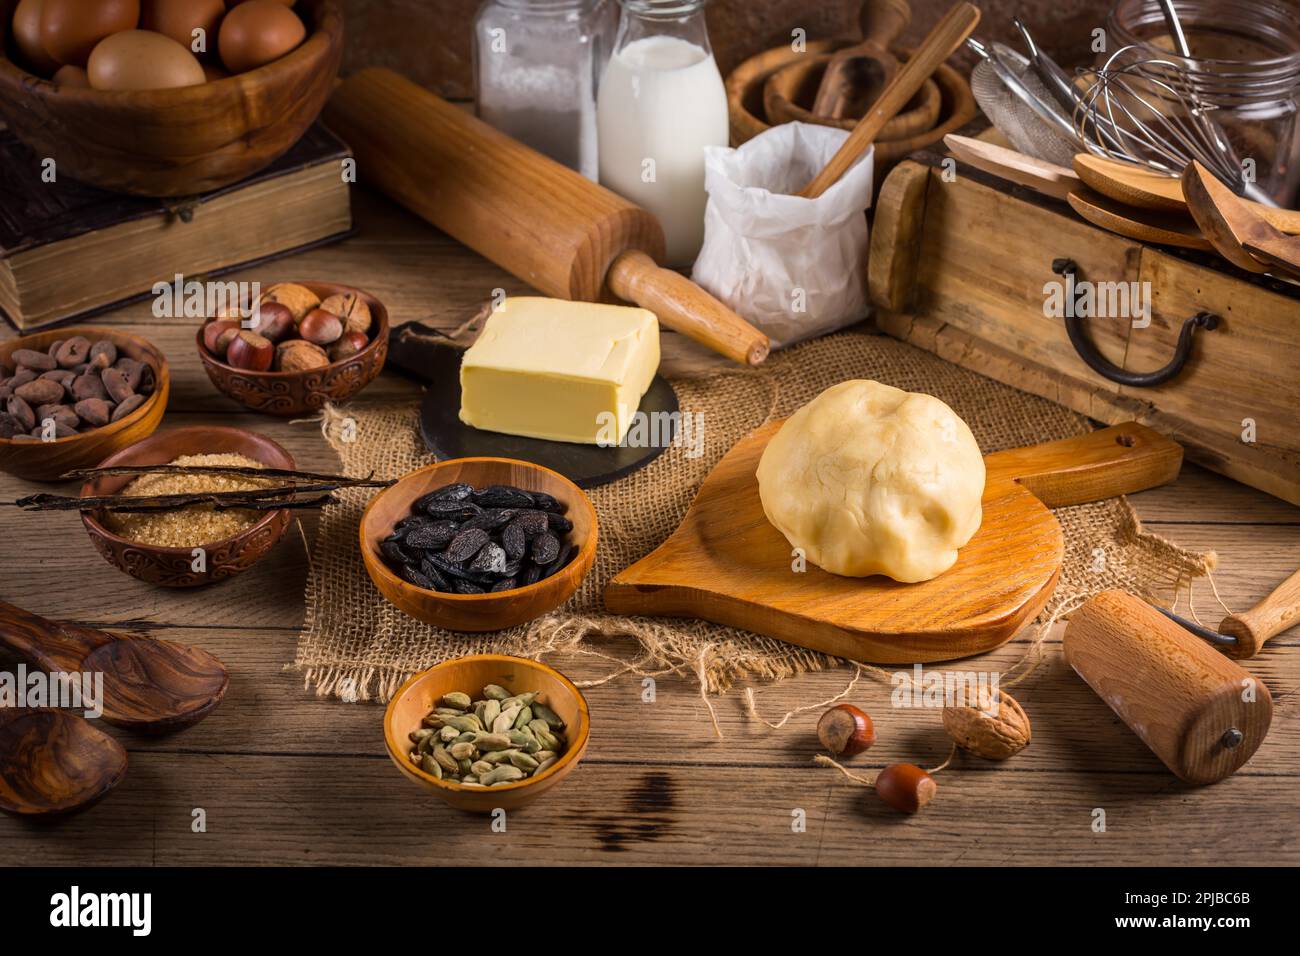 https://c8.alamy.com/comp/2PJBC6B/assortment-of-baking-ingredients-and-kitchen-utensils-in-vintage-wooden-style-christmas-baking-concept-2PJBC6B.jpg